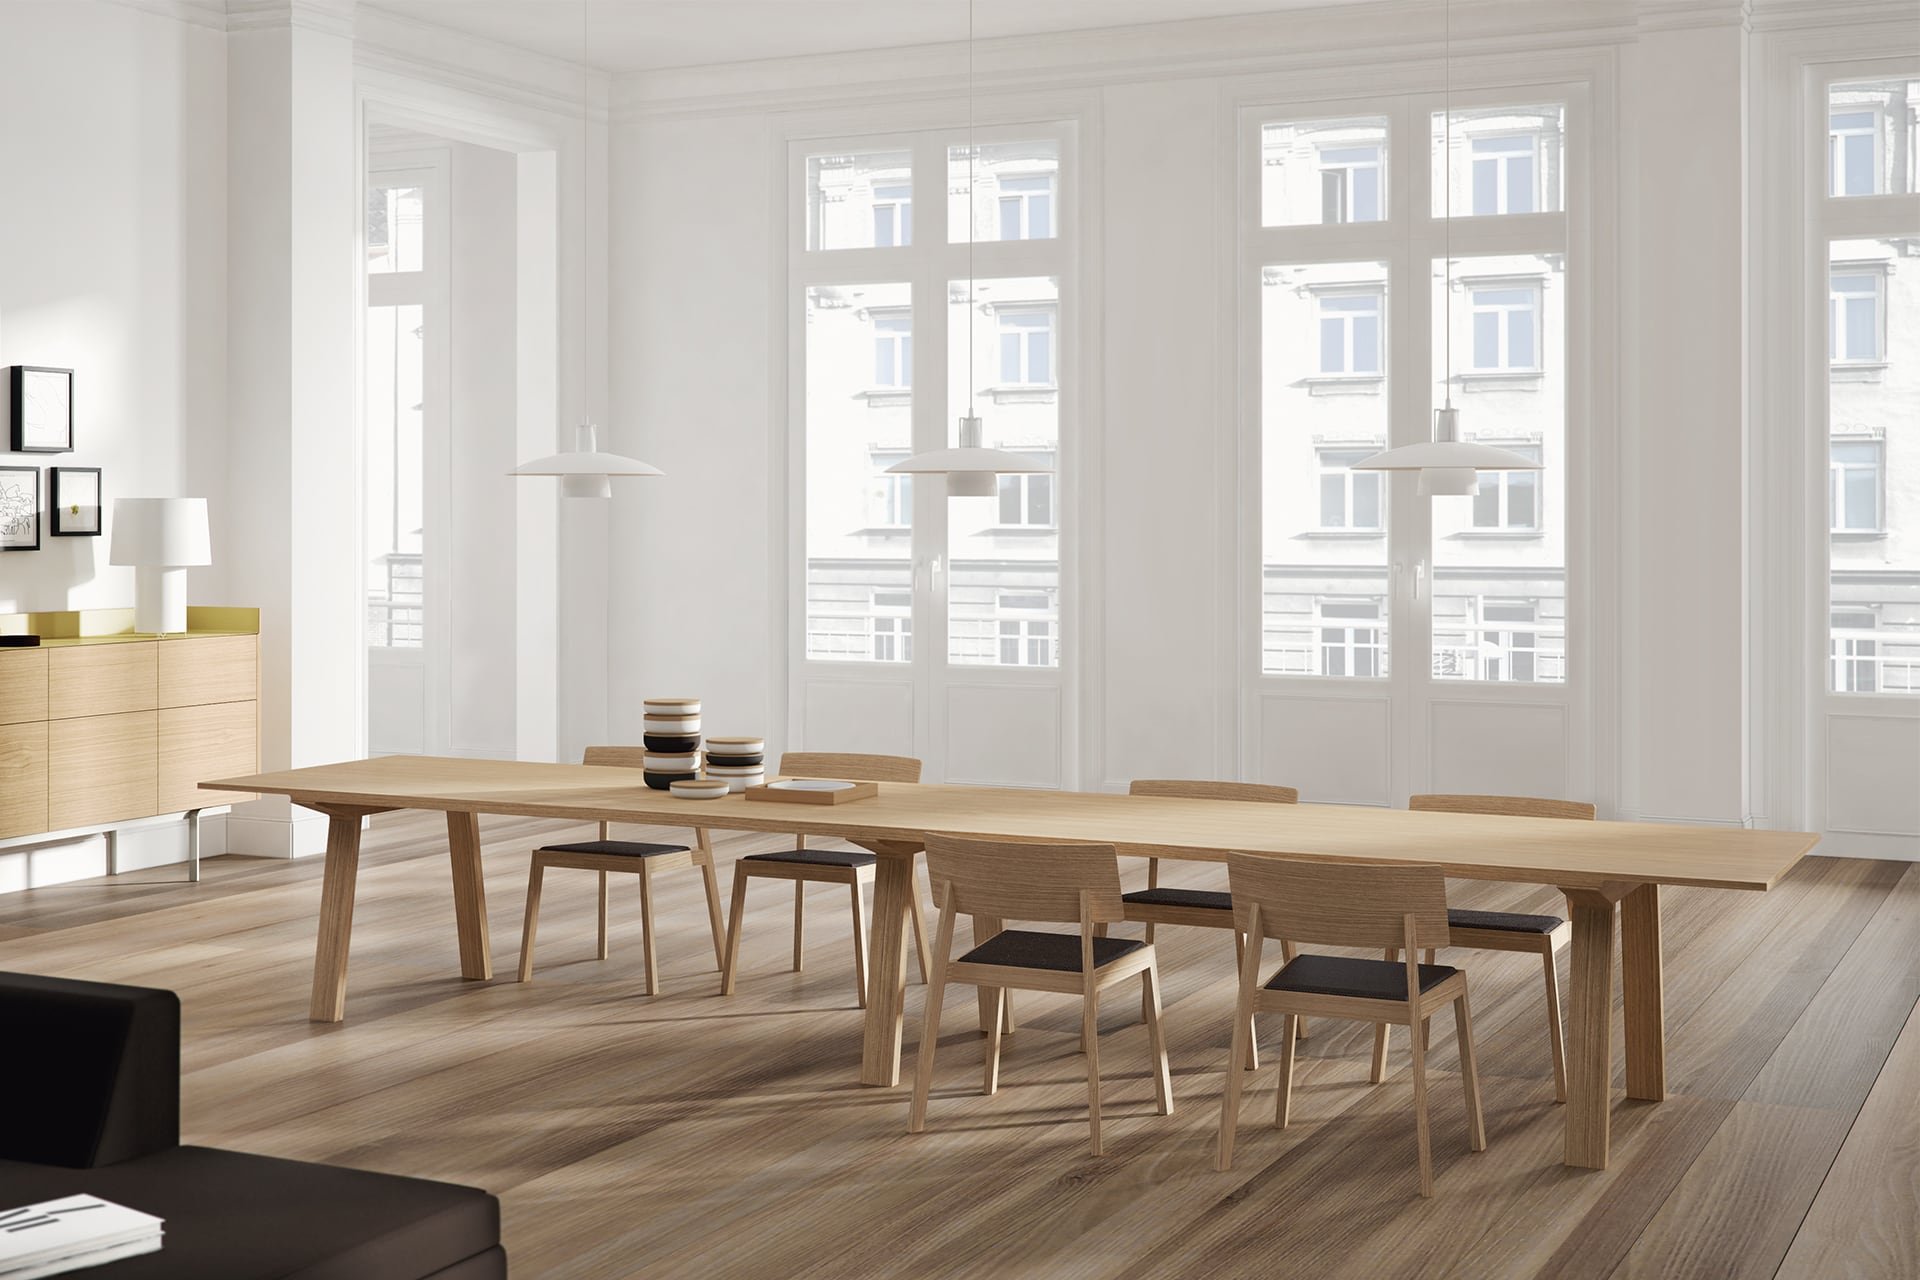 Mitis Wood Dining Table from Punt Mobles, designed by Mario Ruiz